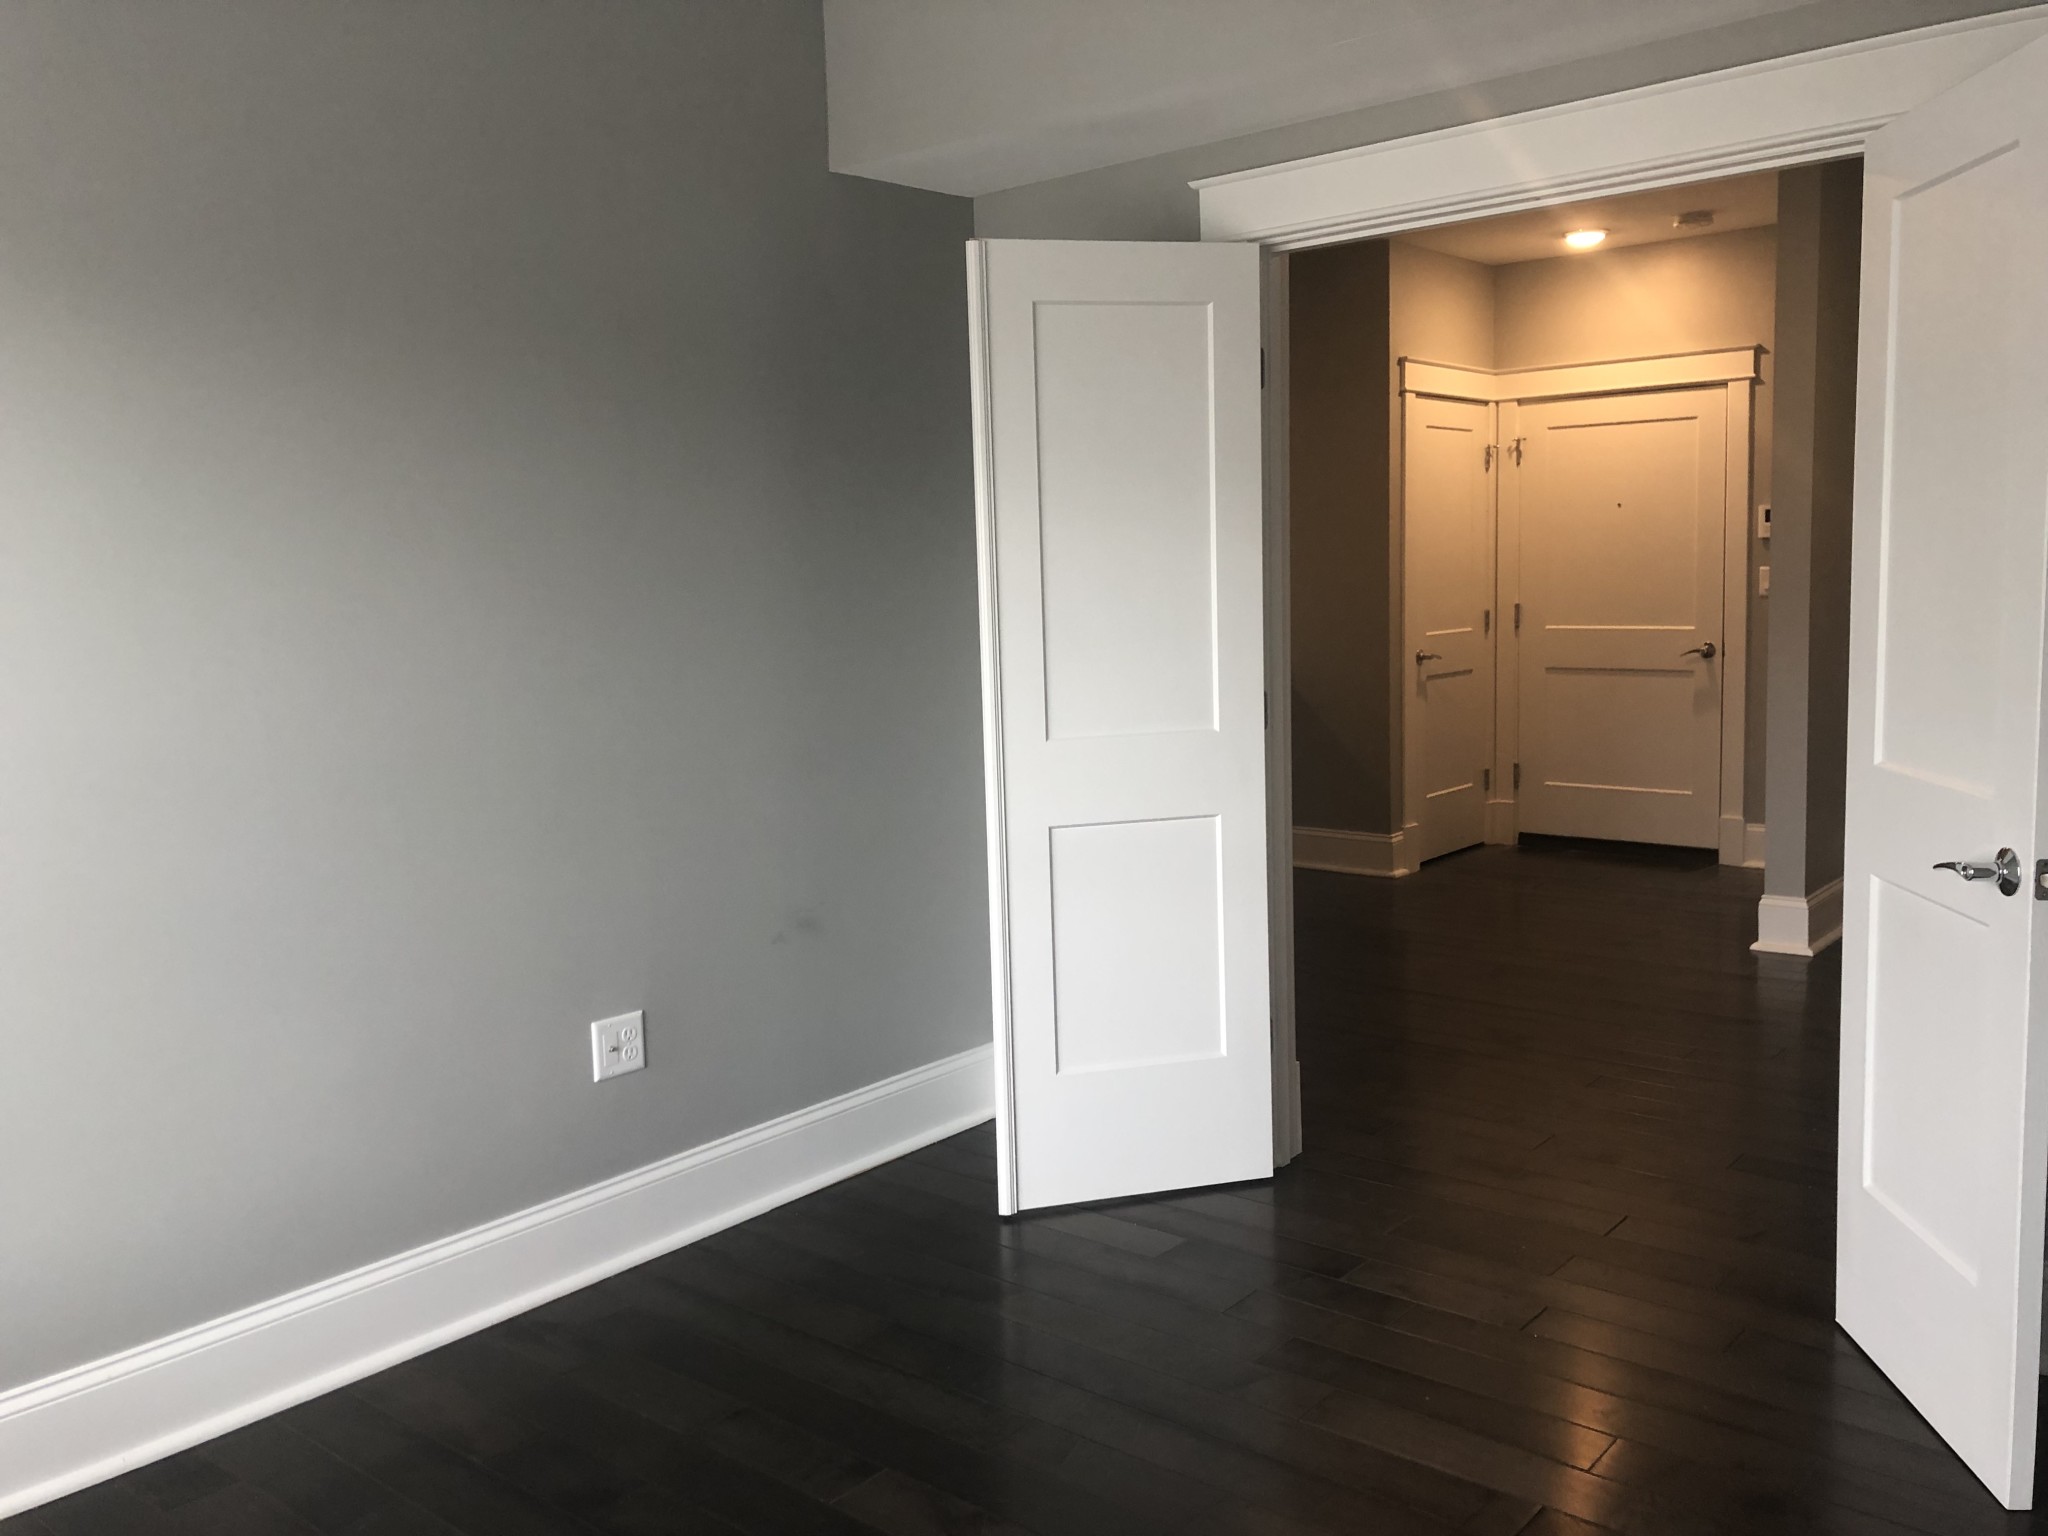 Photos of apartment on Howard St.,Watertown MA 02472